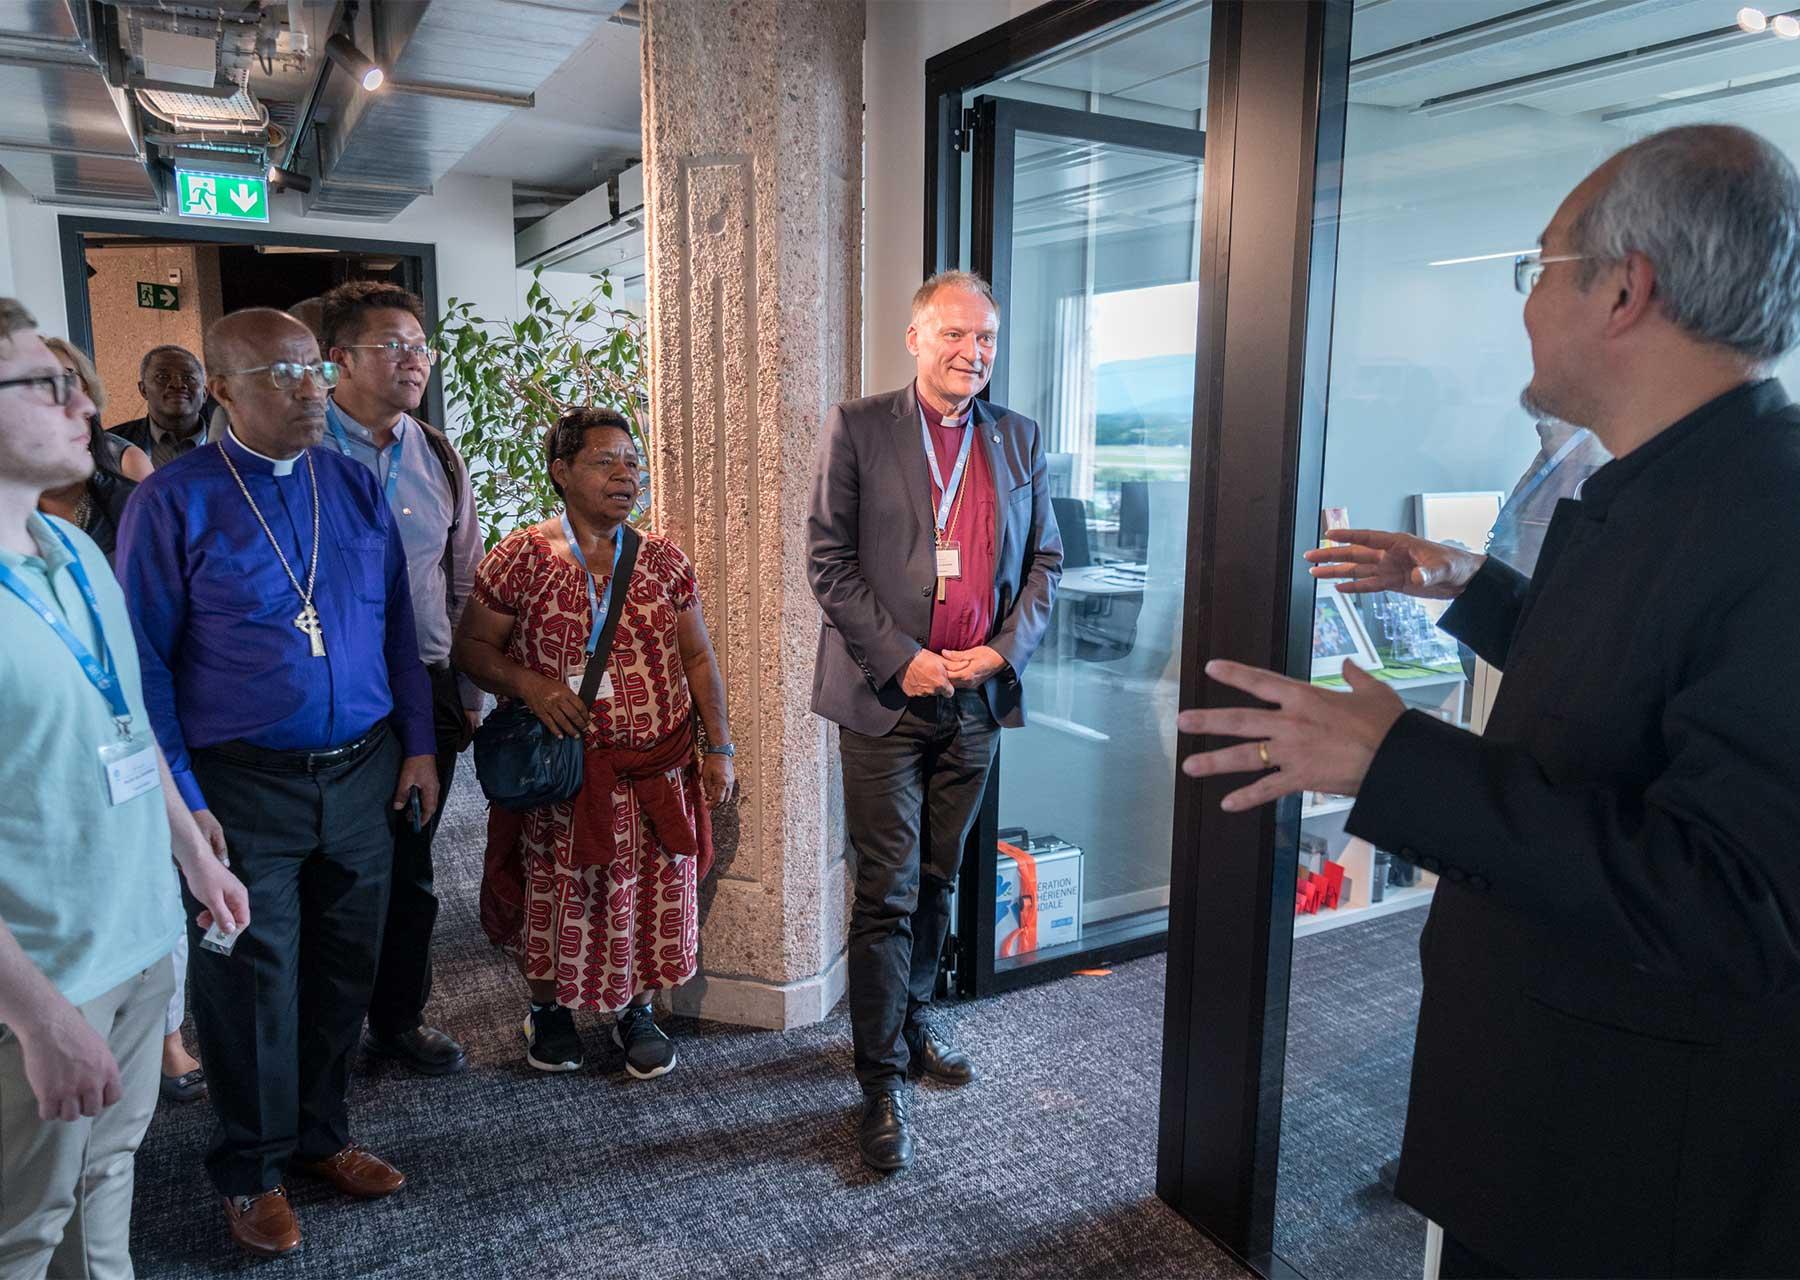 Staff of the LWF Communion office welcome President Henrik Stubkjær and Council members to the new premises near Geneva airport. Photo: LWF/A. Hillert